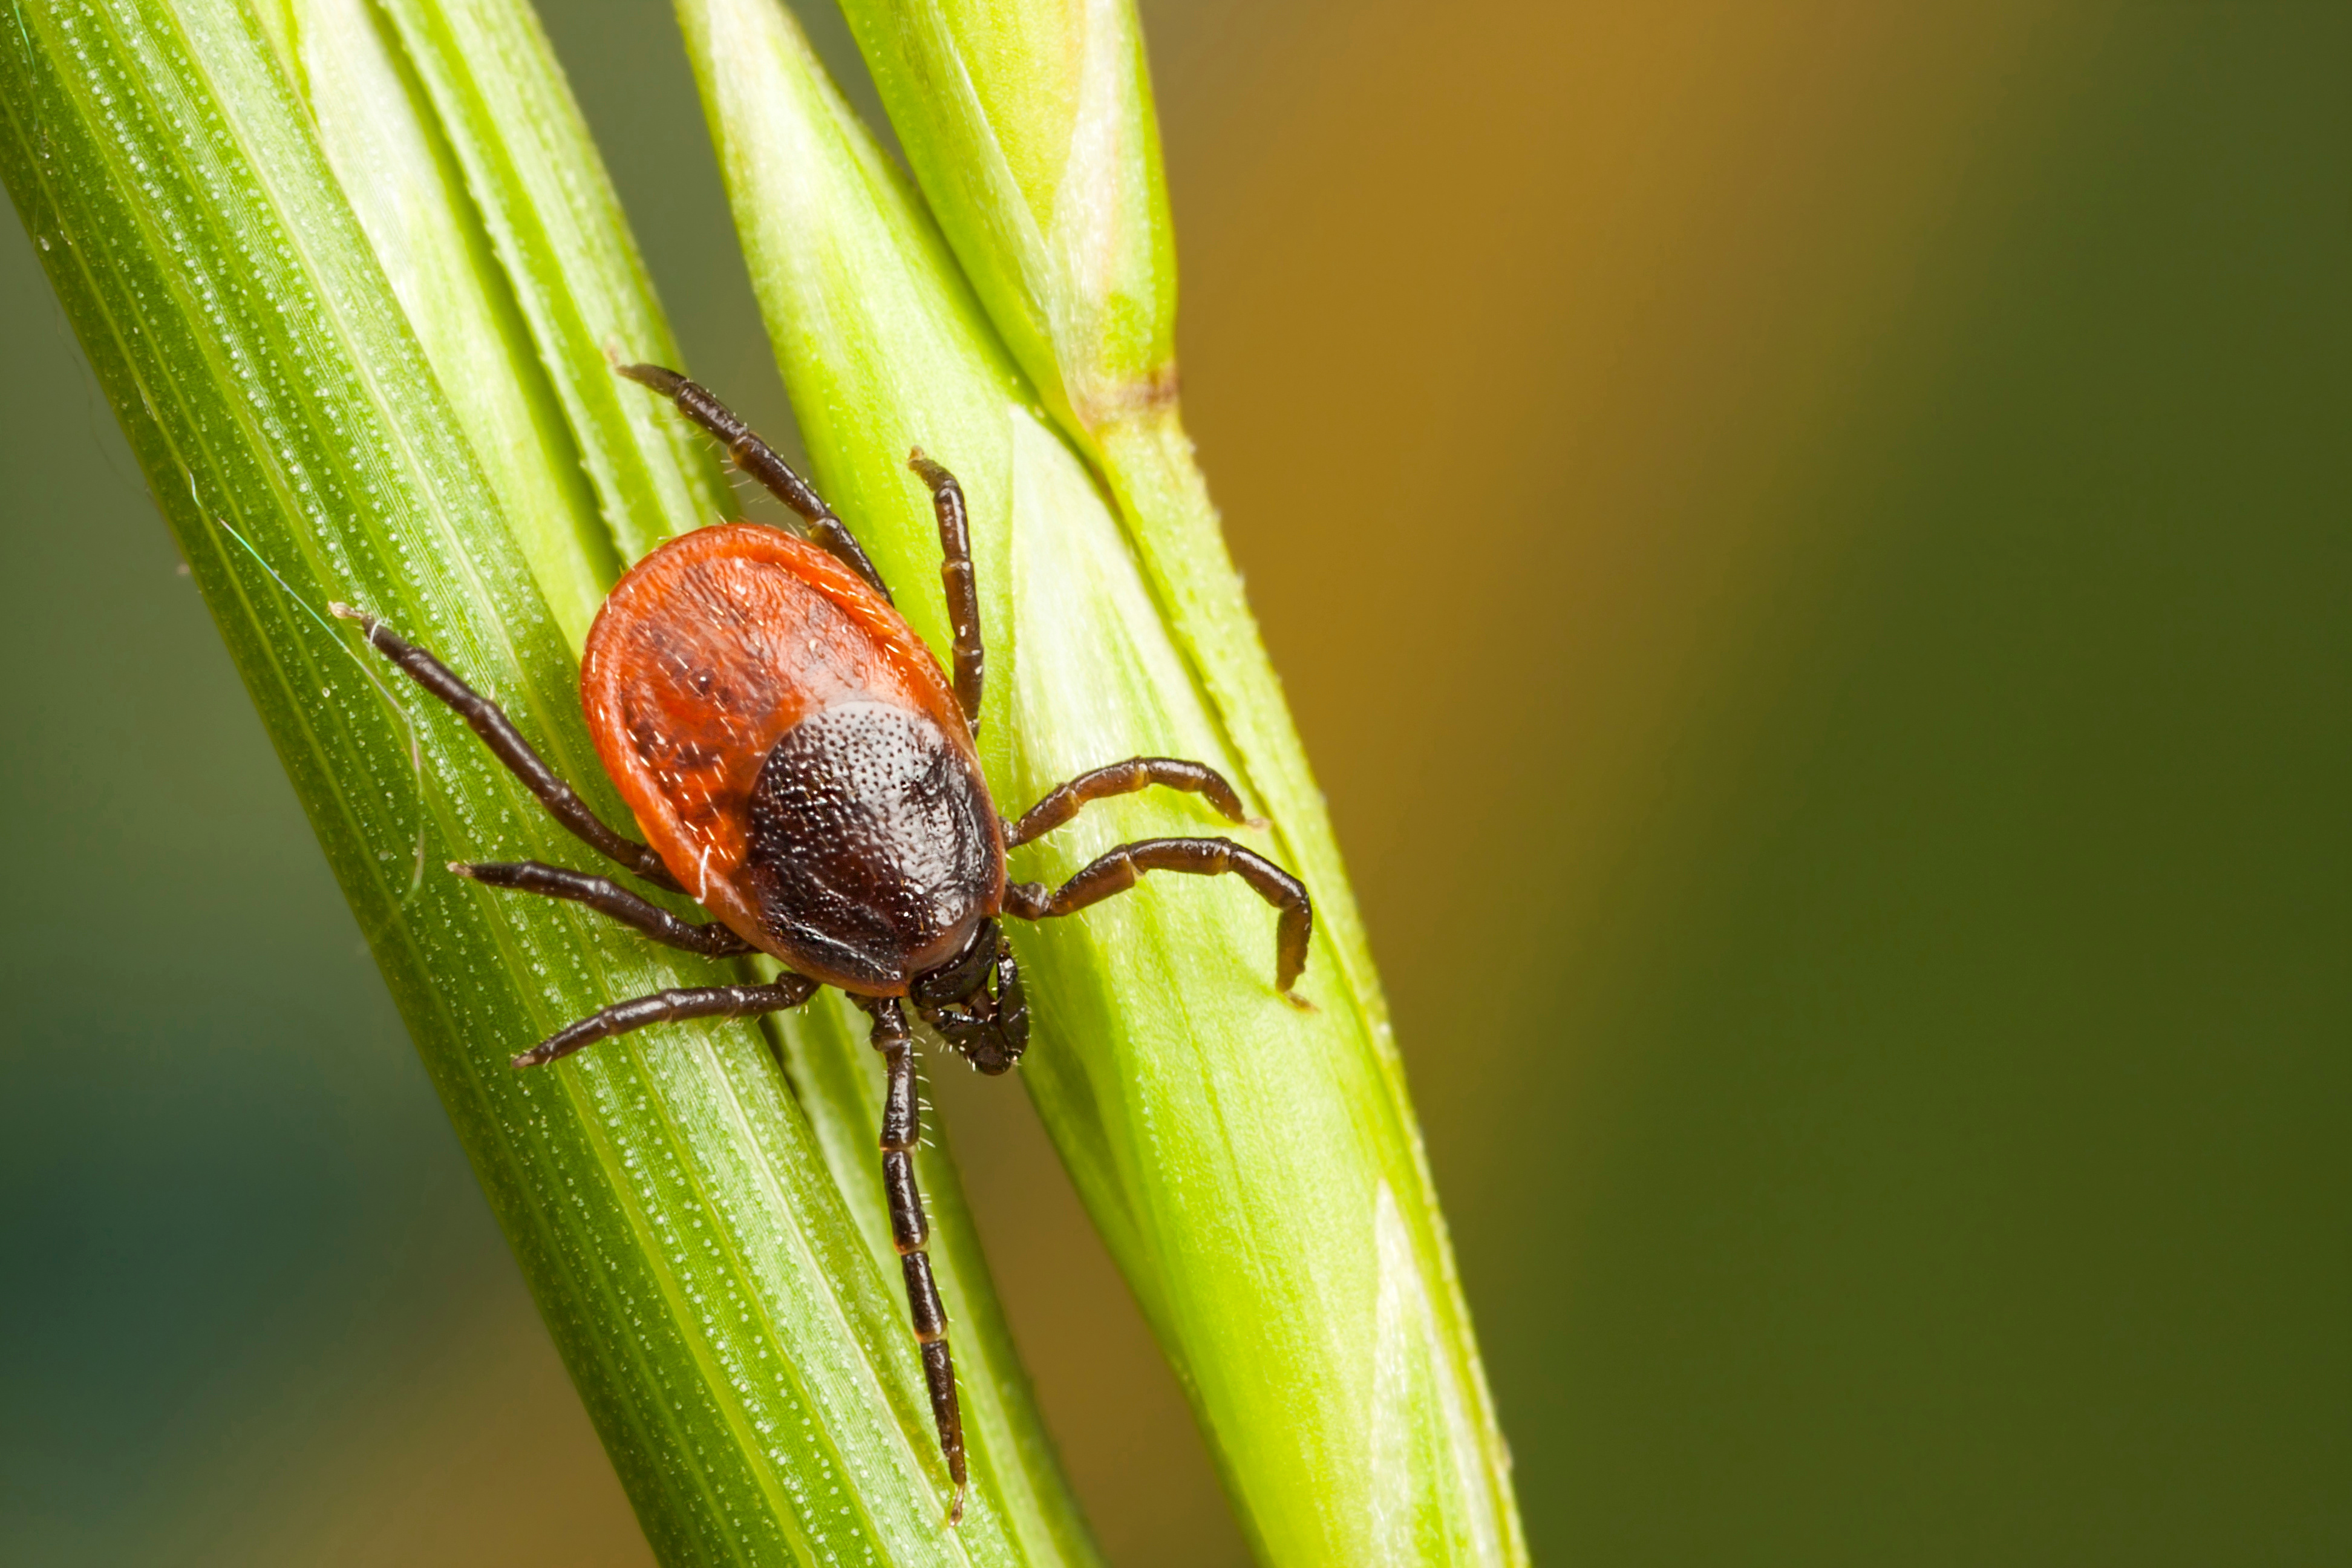 A tick on a leaf - do you need tick pest control in Hillsboro, TX? Contact GGA Pest Management Hillsboro today!